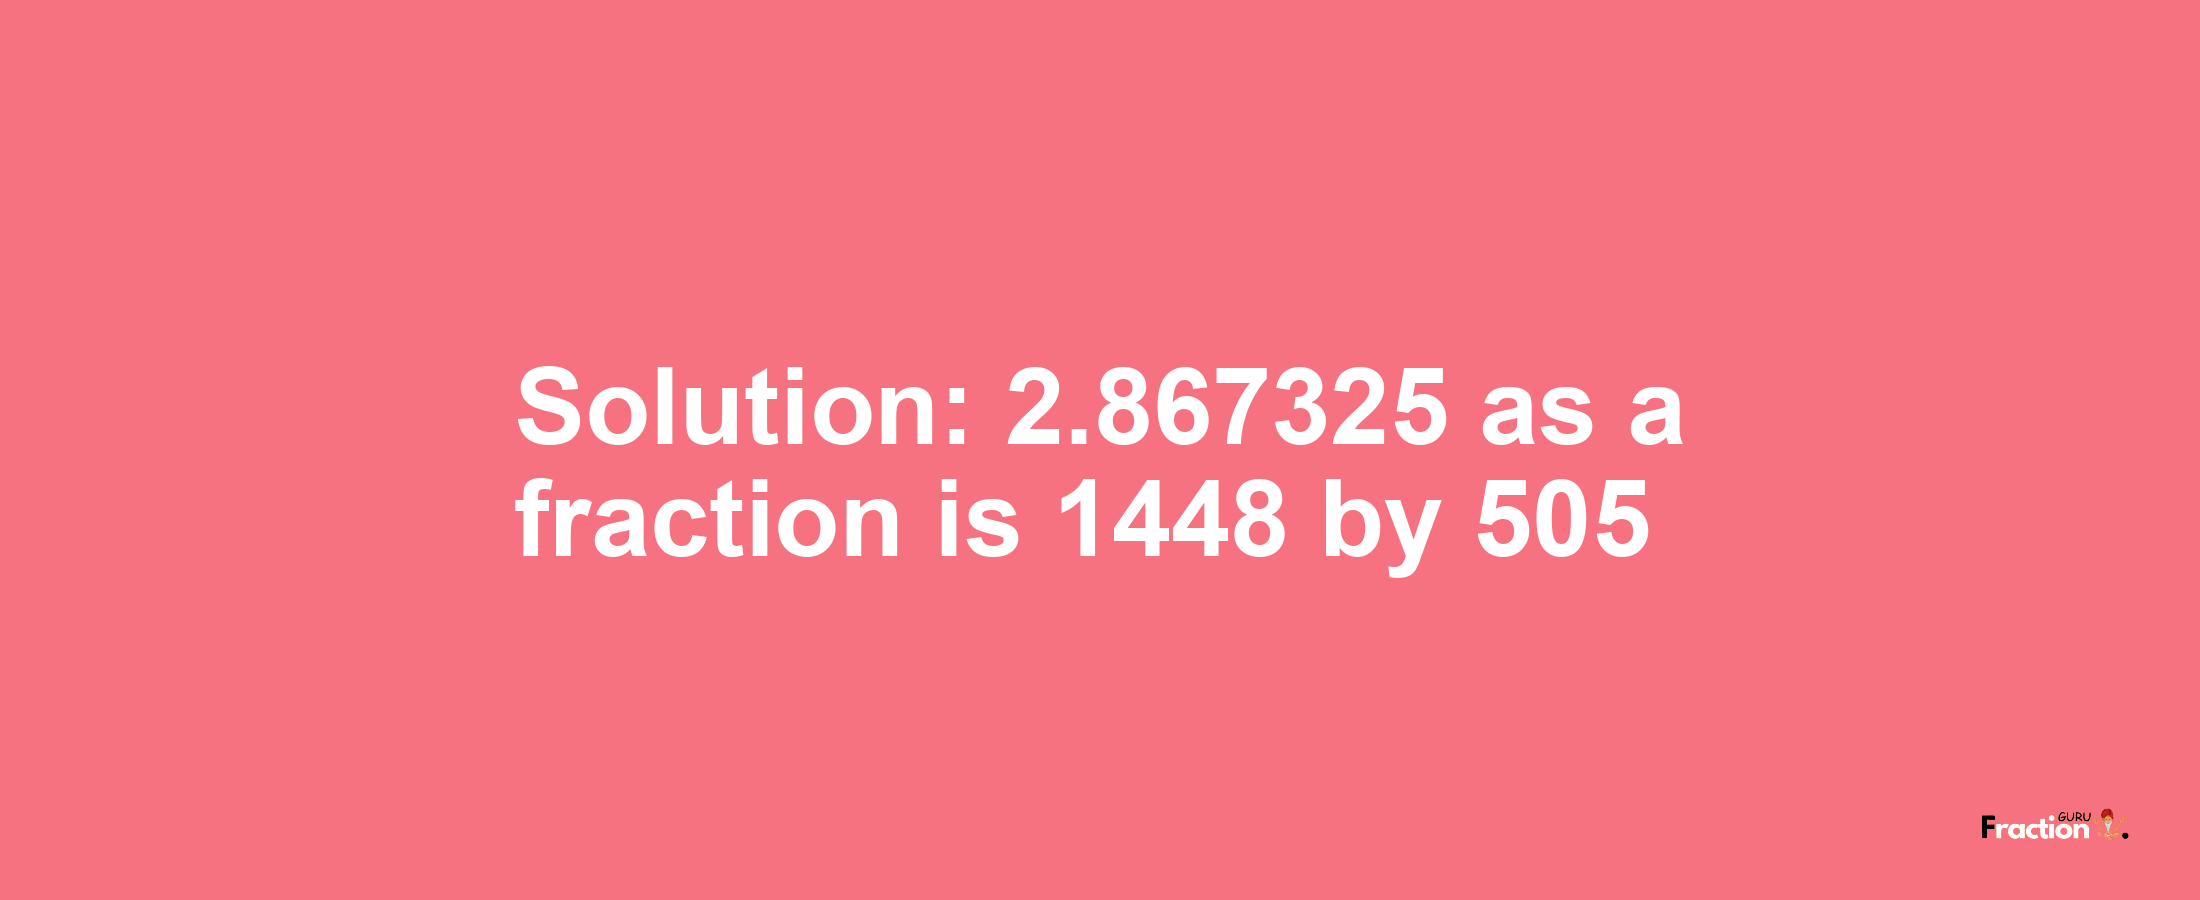 Solution:2.867325 as a fraction is 1448/505